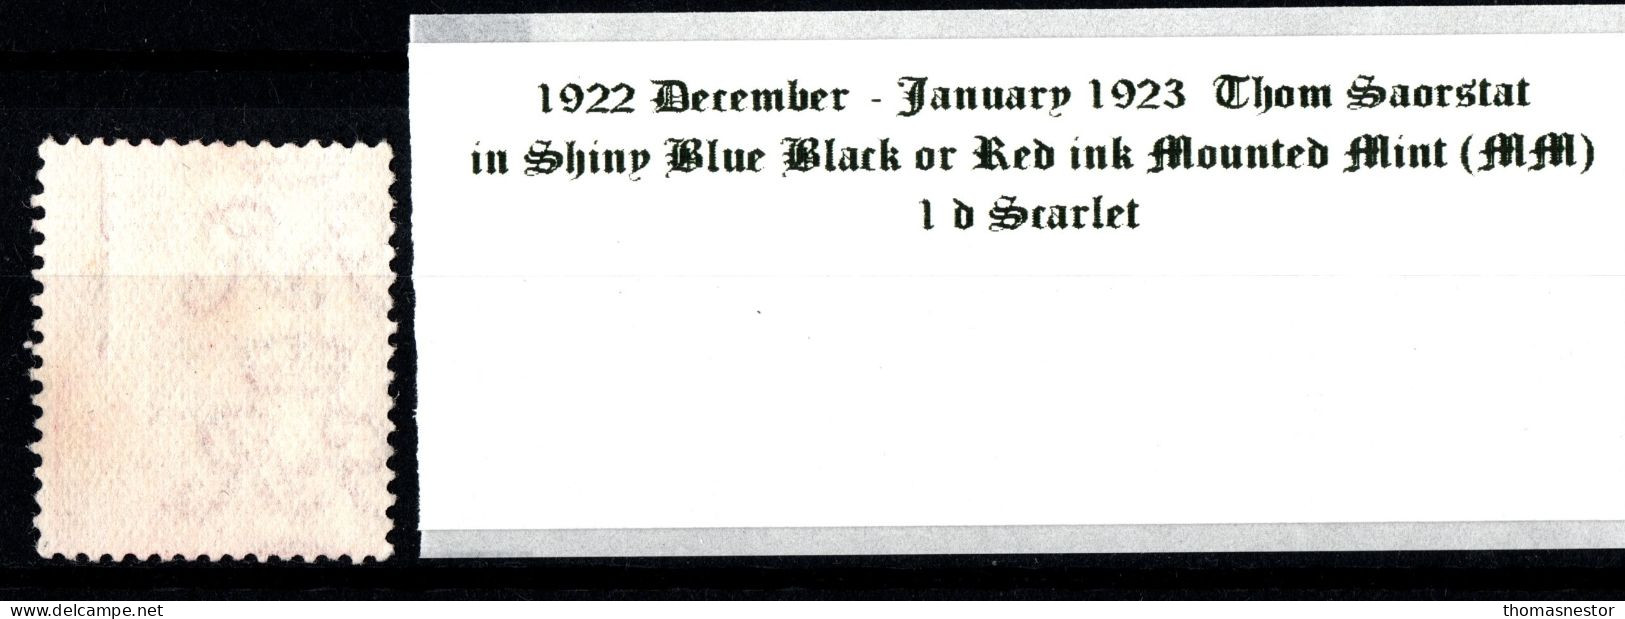 1922 - 1923 December - January Thom Saorstát In Shiny Blue Black Or Red Ink 1 D Scarlet Mounted Mint (MM) - Neufs